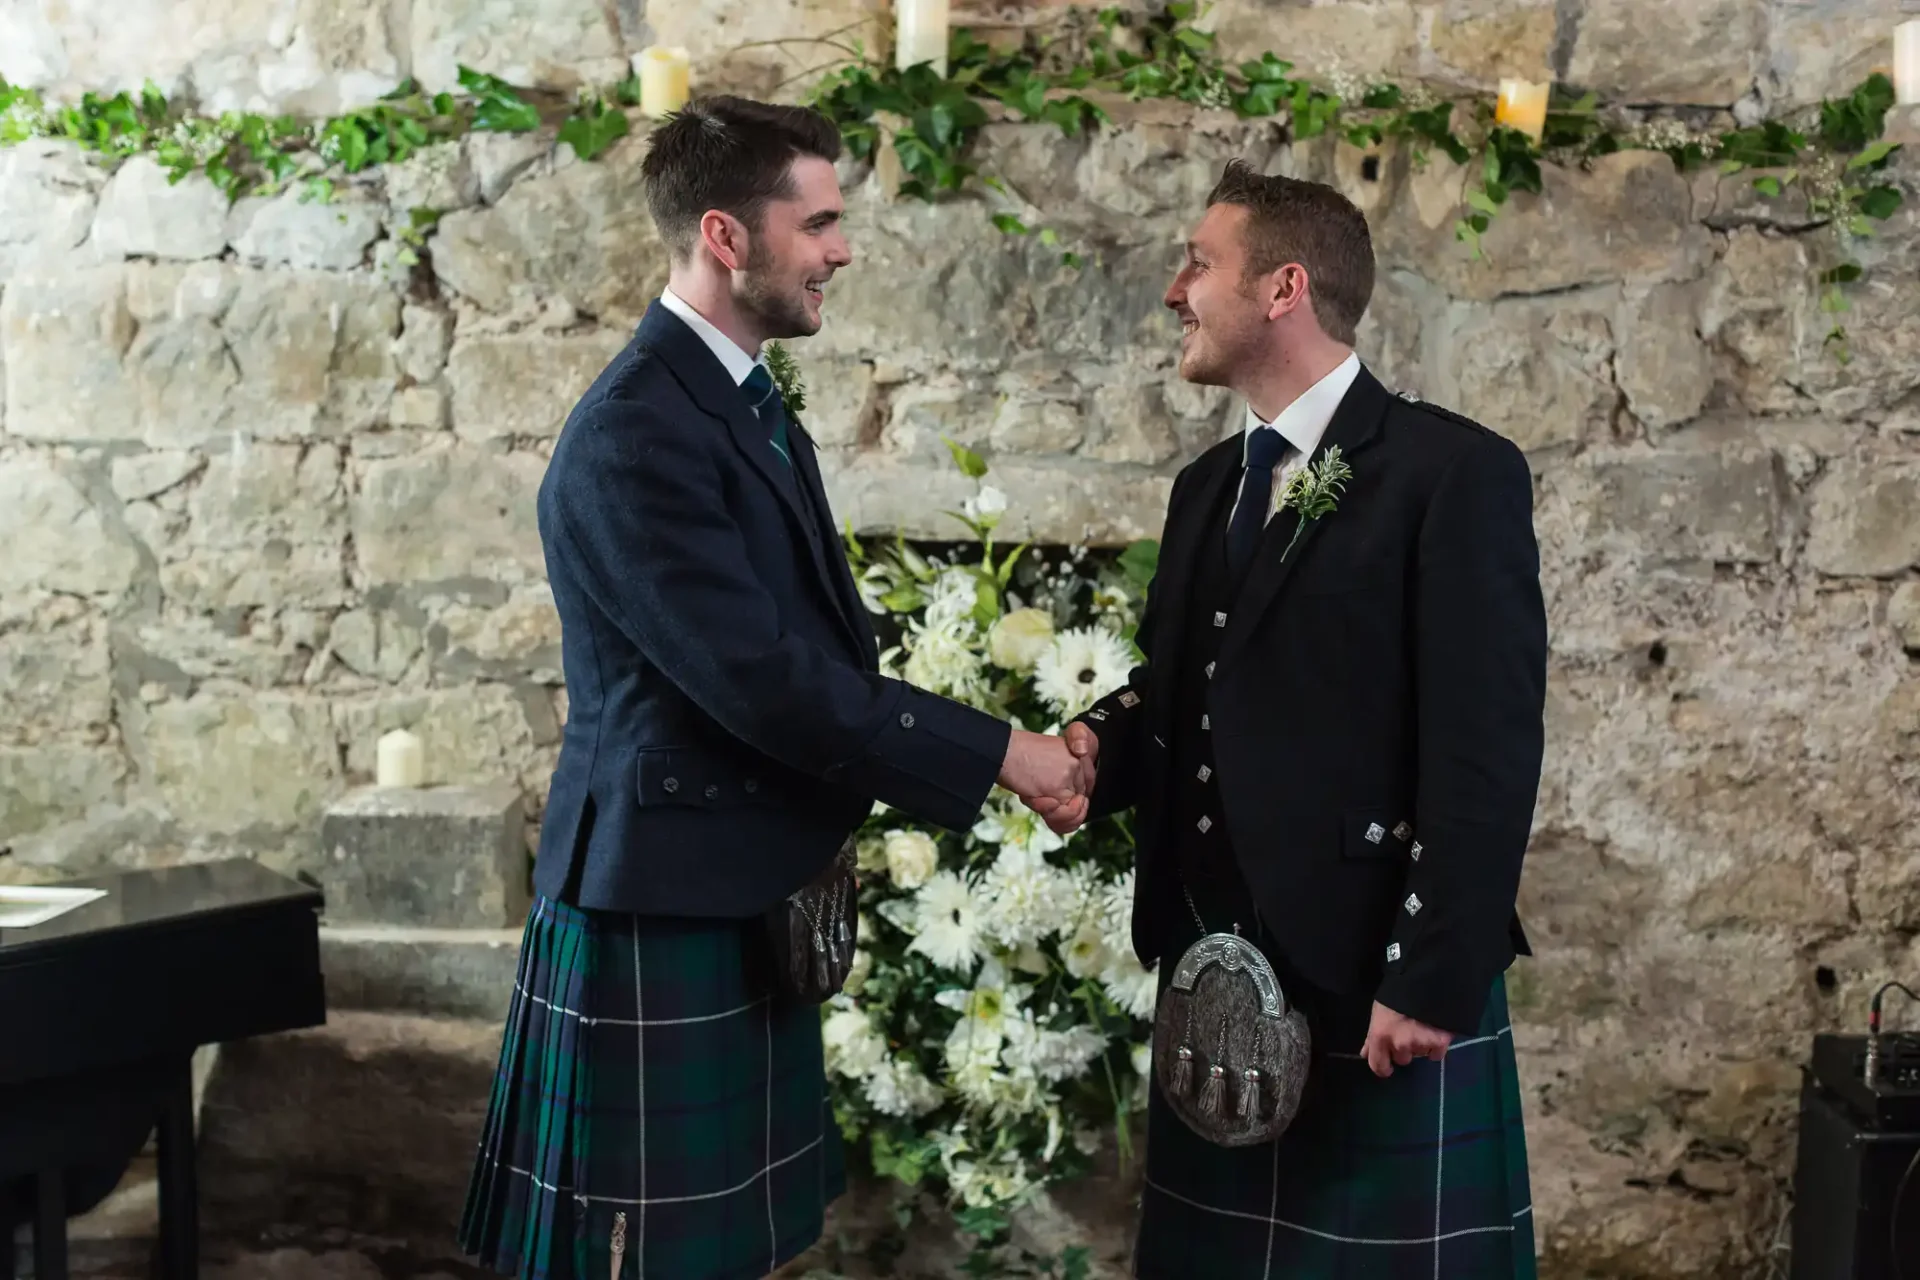 Two men in traditional scottish kilts shaking hands at a wedding ceremony, standing in front of a stone wall adorned with ivy.